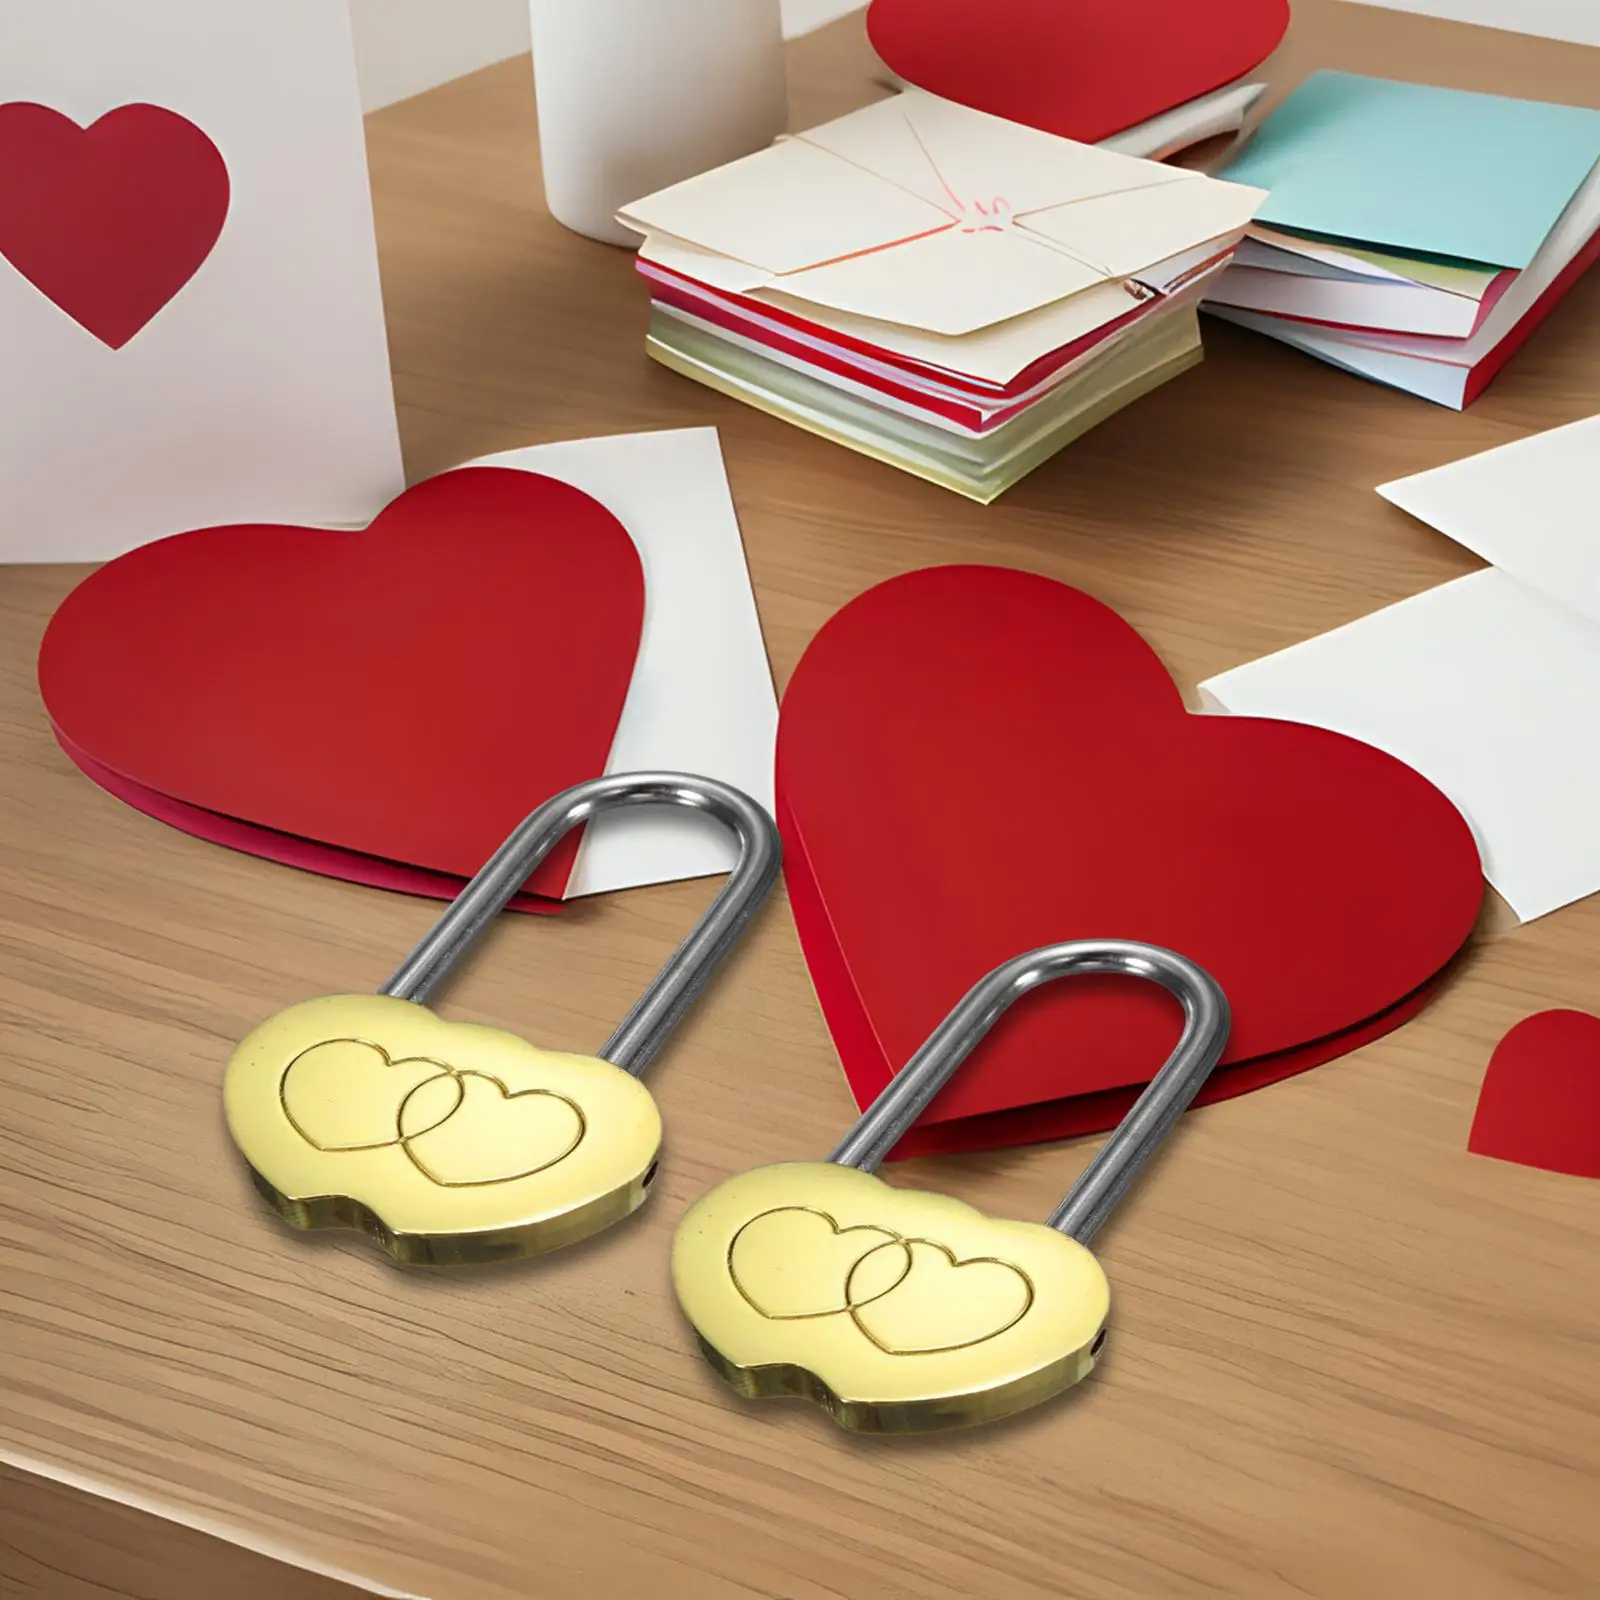 2 Pieces Love Lock without Key Rust Resistant Wish Lock Valentines Gift for Small Luggage Wedding Diary Book Jewelry Box Lovers